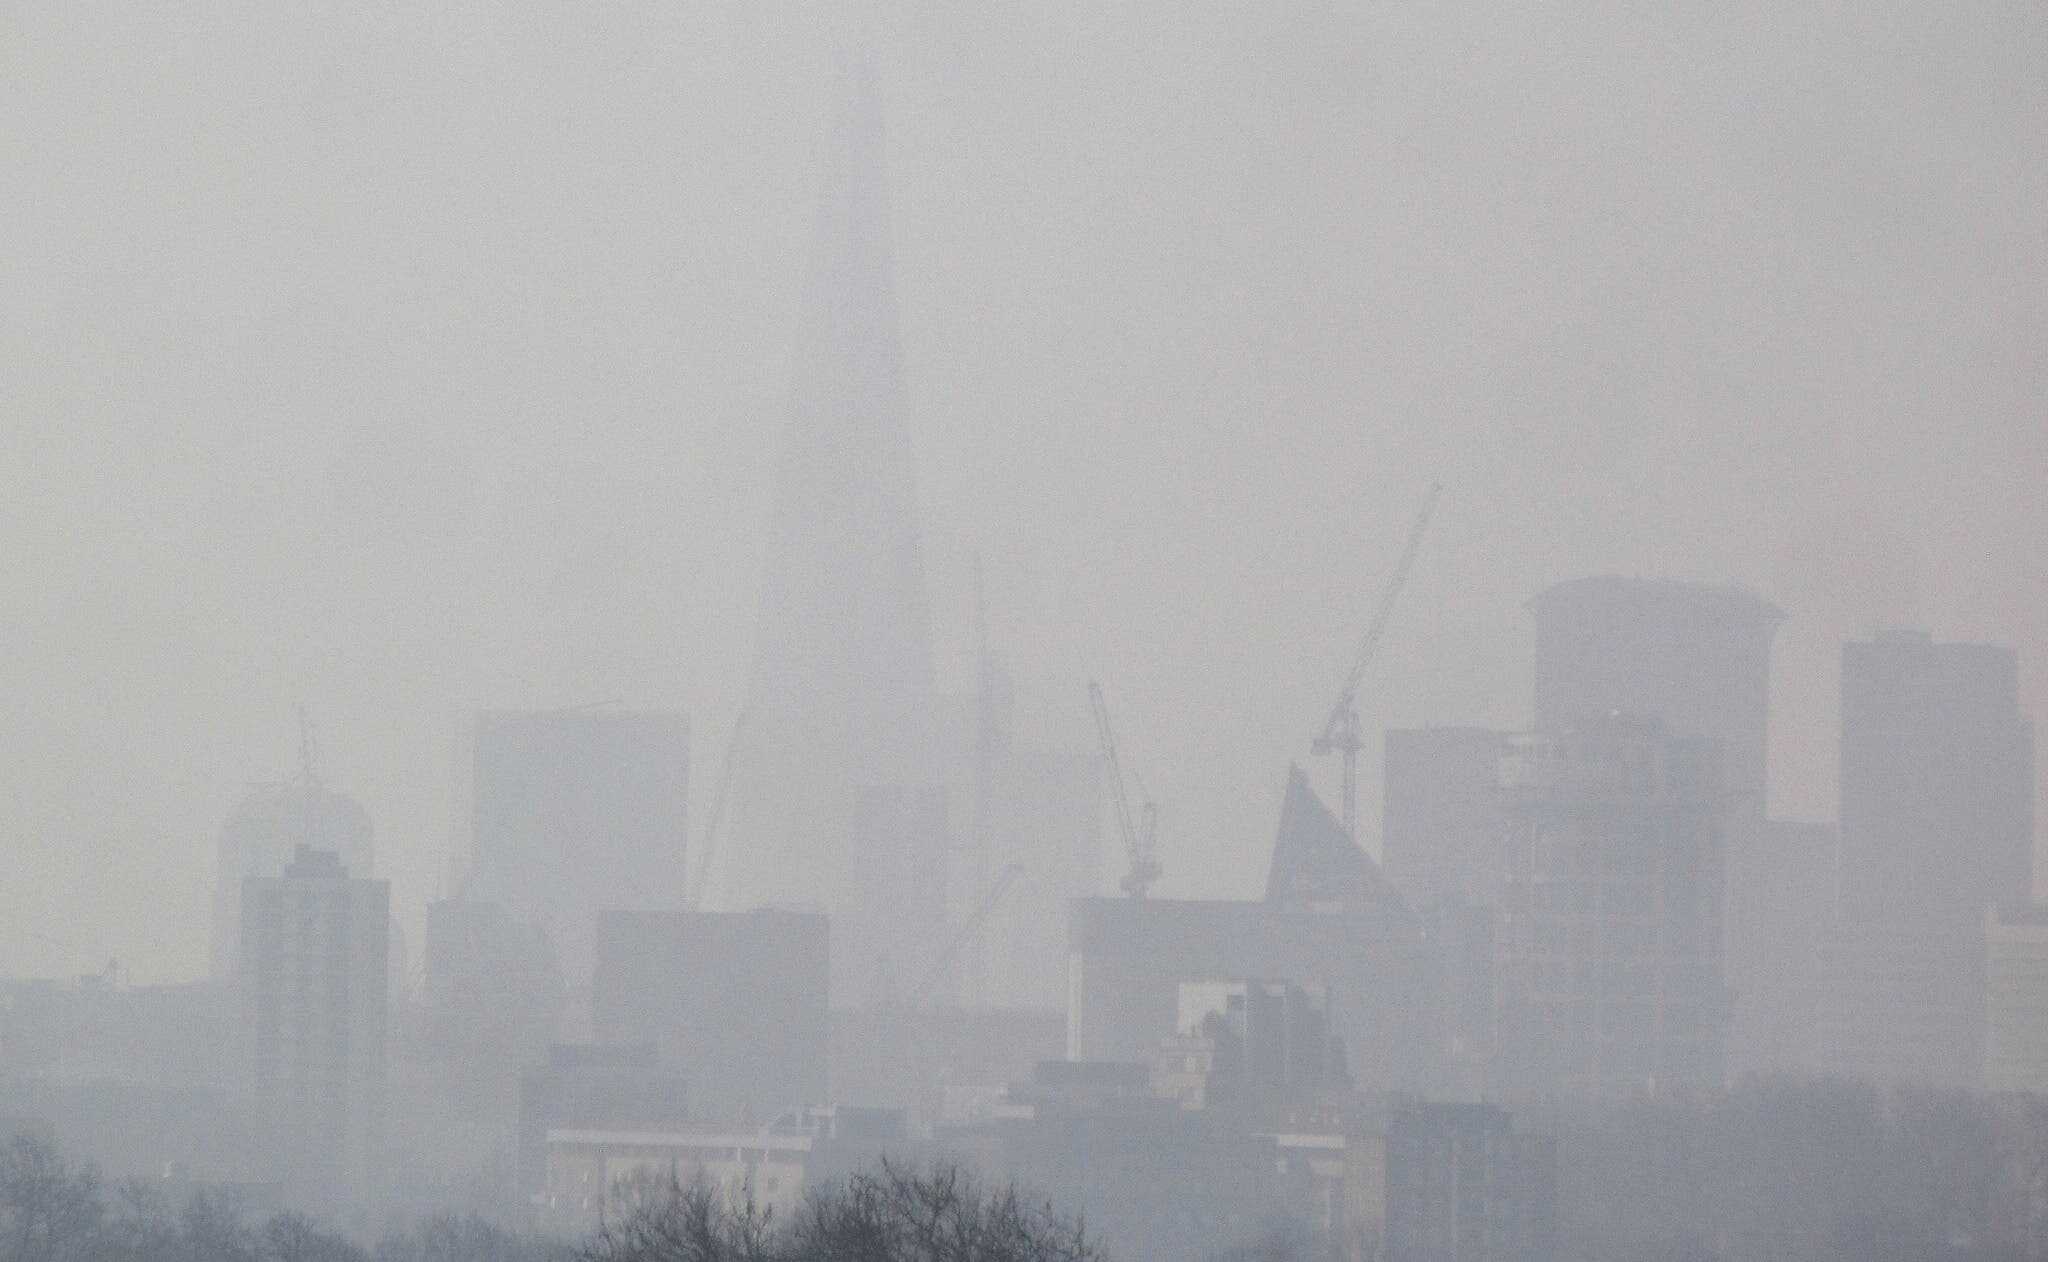 London and pollution are two old friends. Image credits: David Holt.